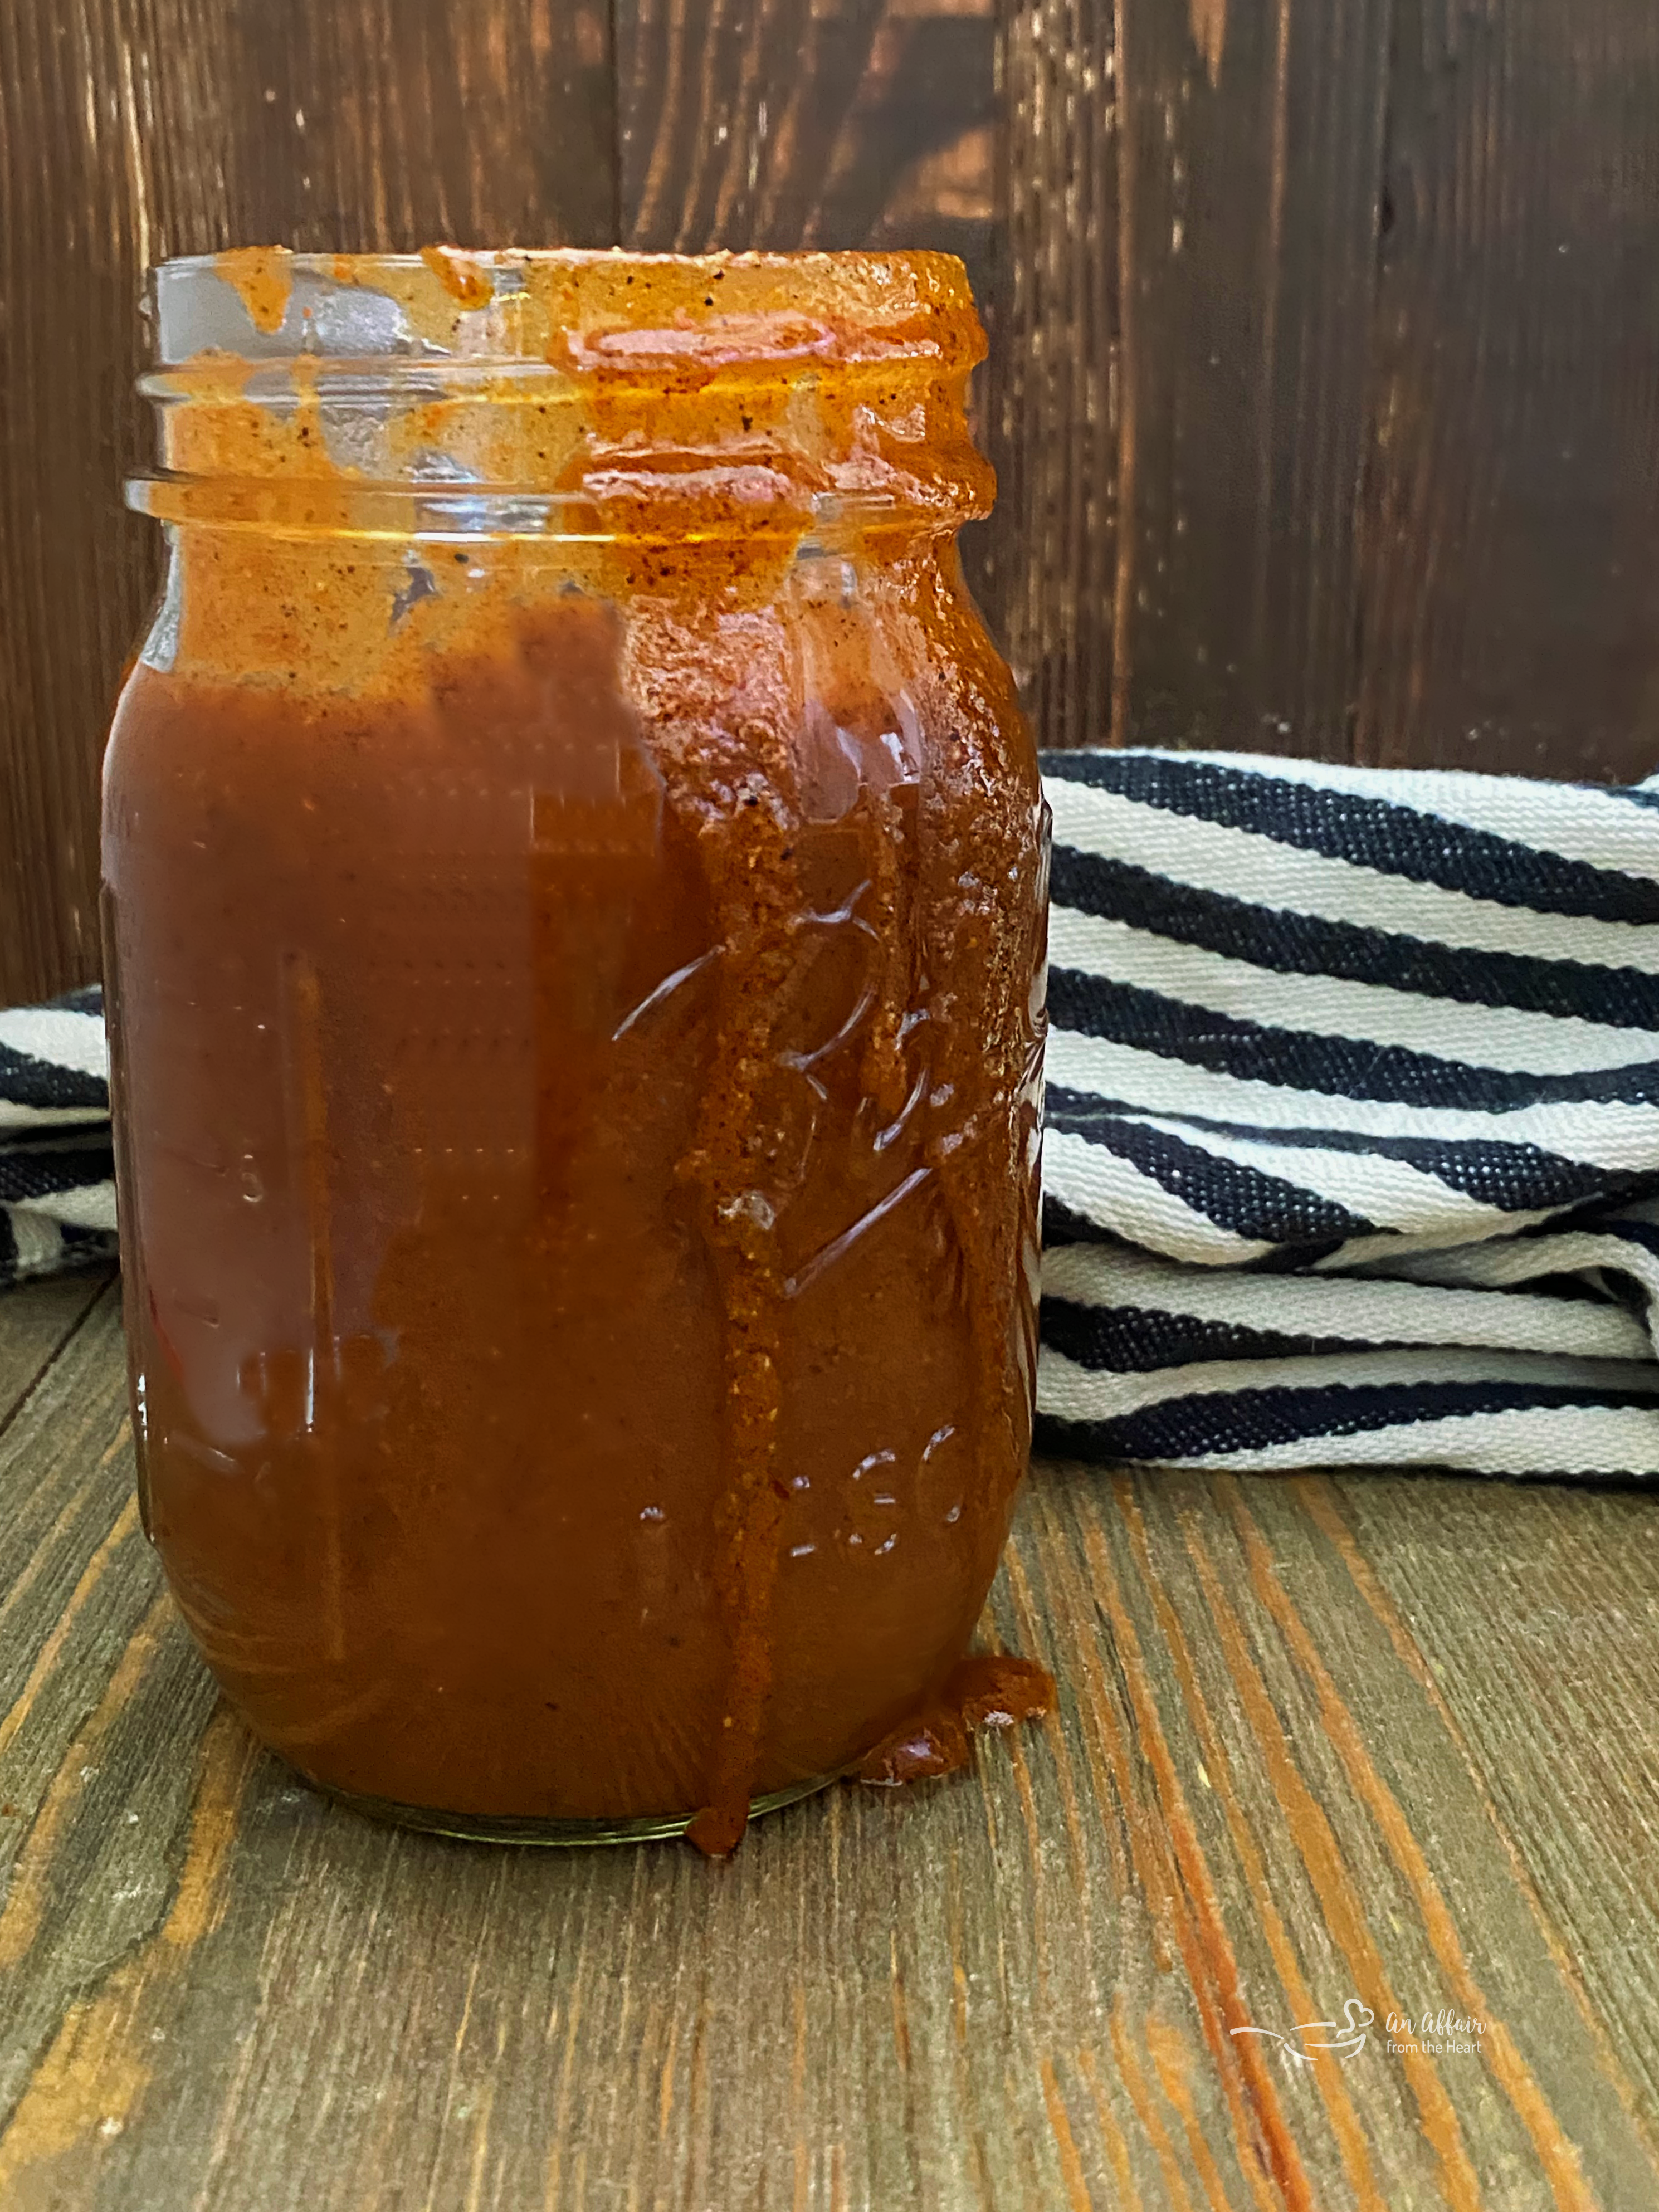 How To: Make Your Own Homemade Red Enchilada Sauce